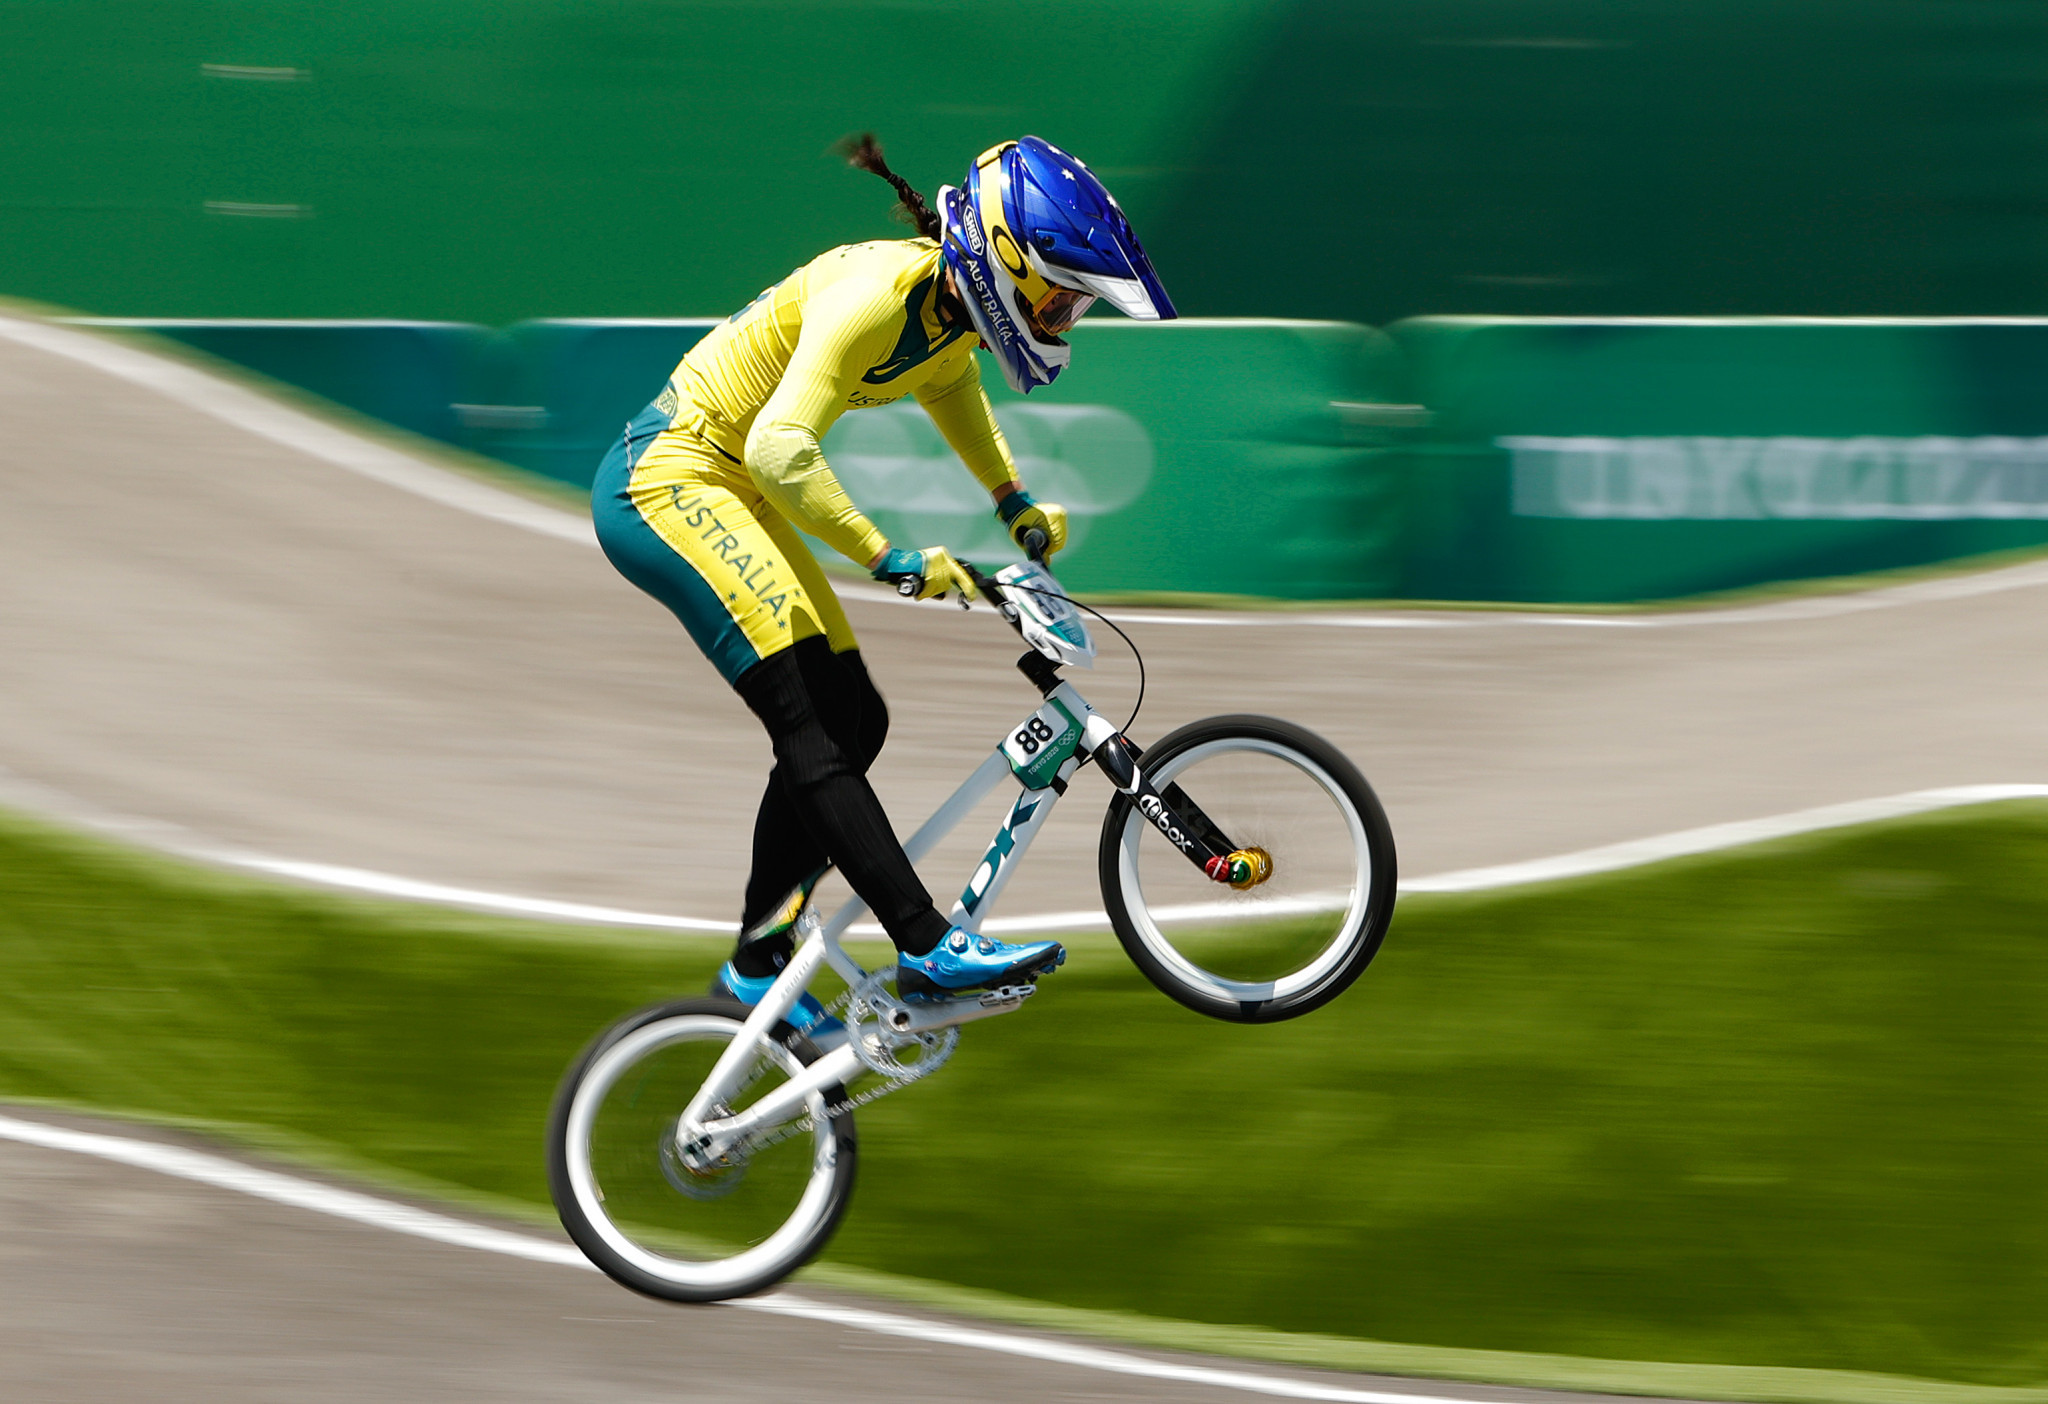 Sakakibara clinches overall BMX Racing World Cup title after nearly quitting sport